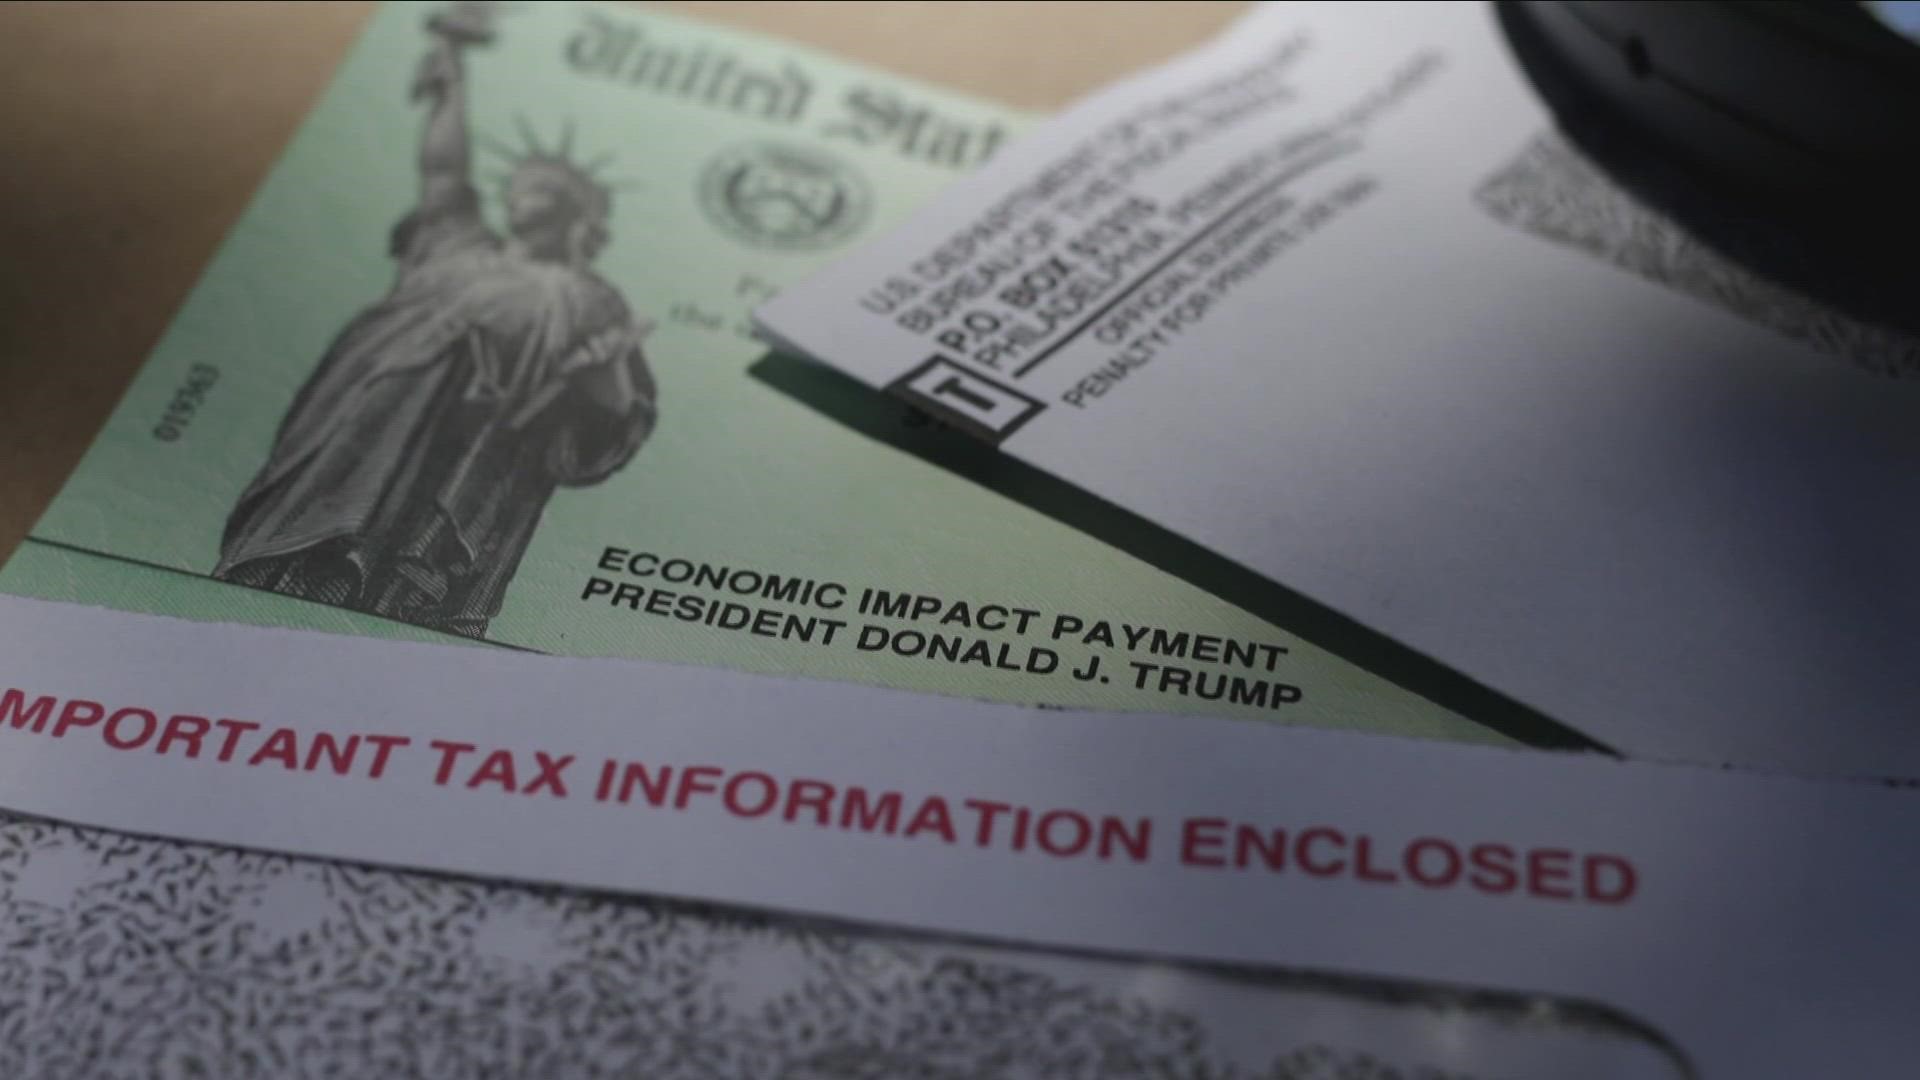 Changes could mean lower tax refunds